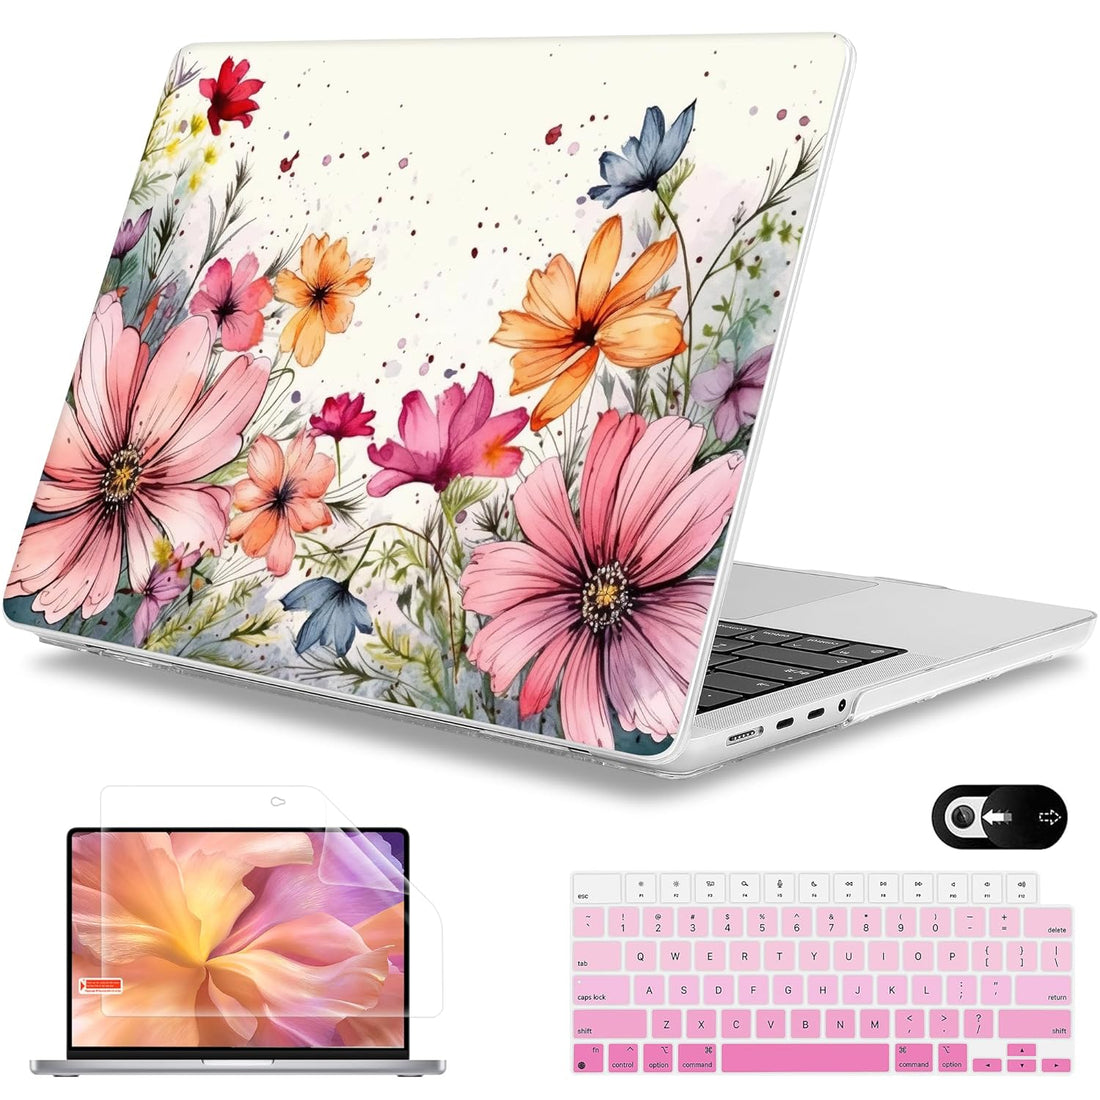 Mektron Case for M3 MacBook Pro 16" M1 A2485/M2 A2780 (2021/2023) with Touch ID, Hard Shell Plastic Laptop Cover Keyboard Skin Compatible MacBook Pro 16.2" M1 Pro/Max Chips, Colorful Floral